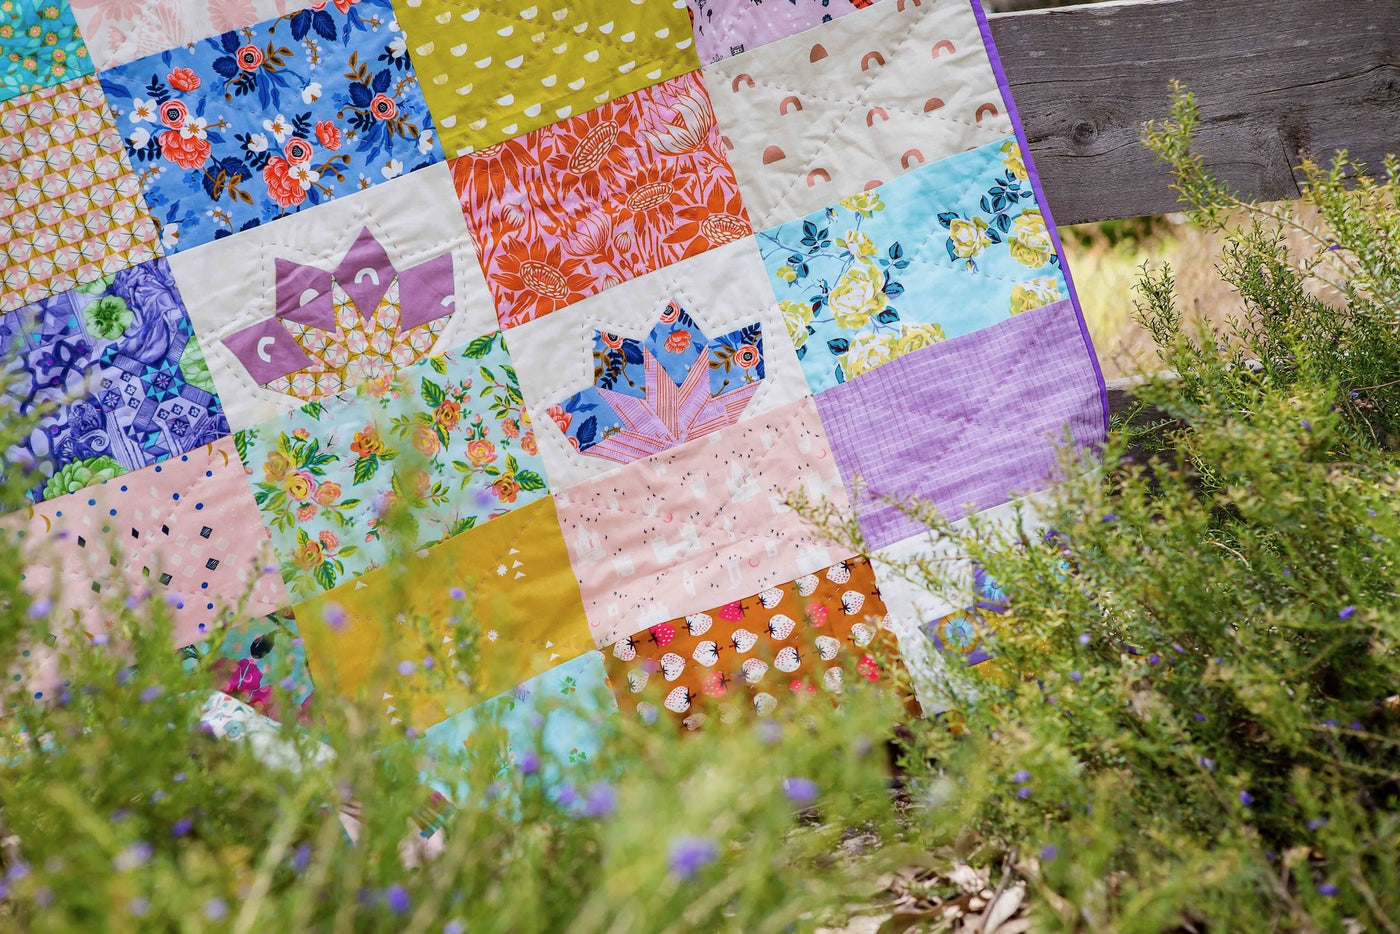 Rosemary Quilt 2 in 1 Bundle